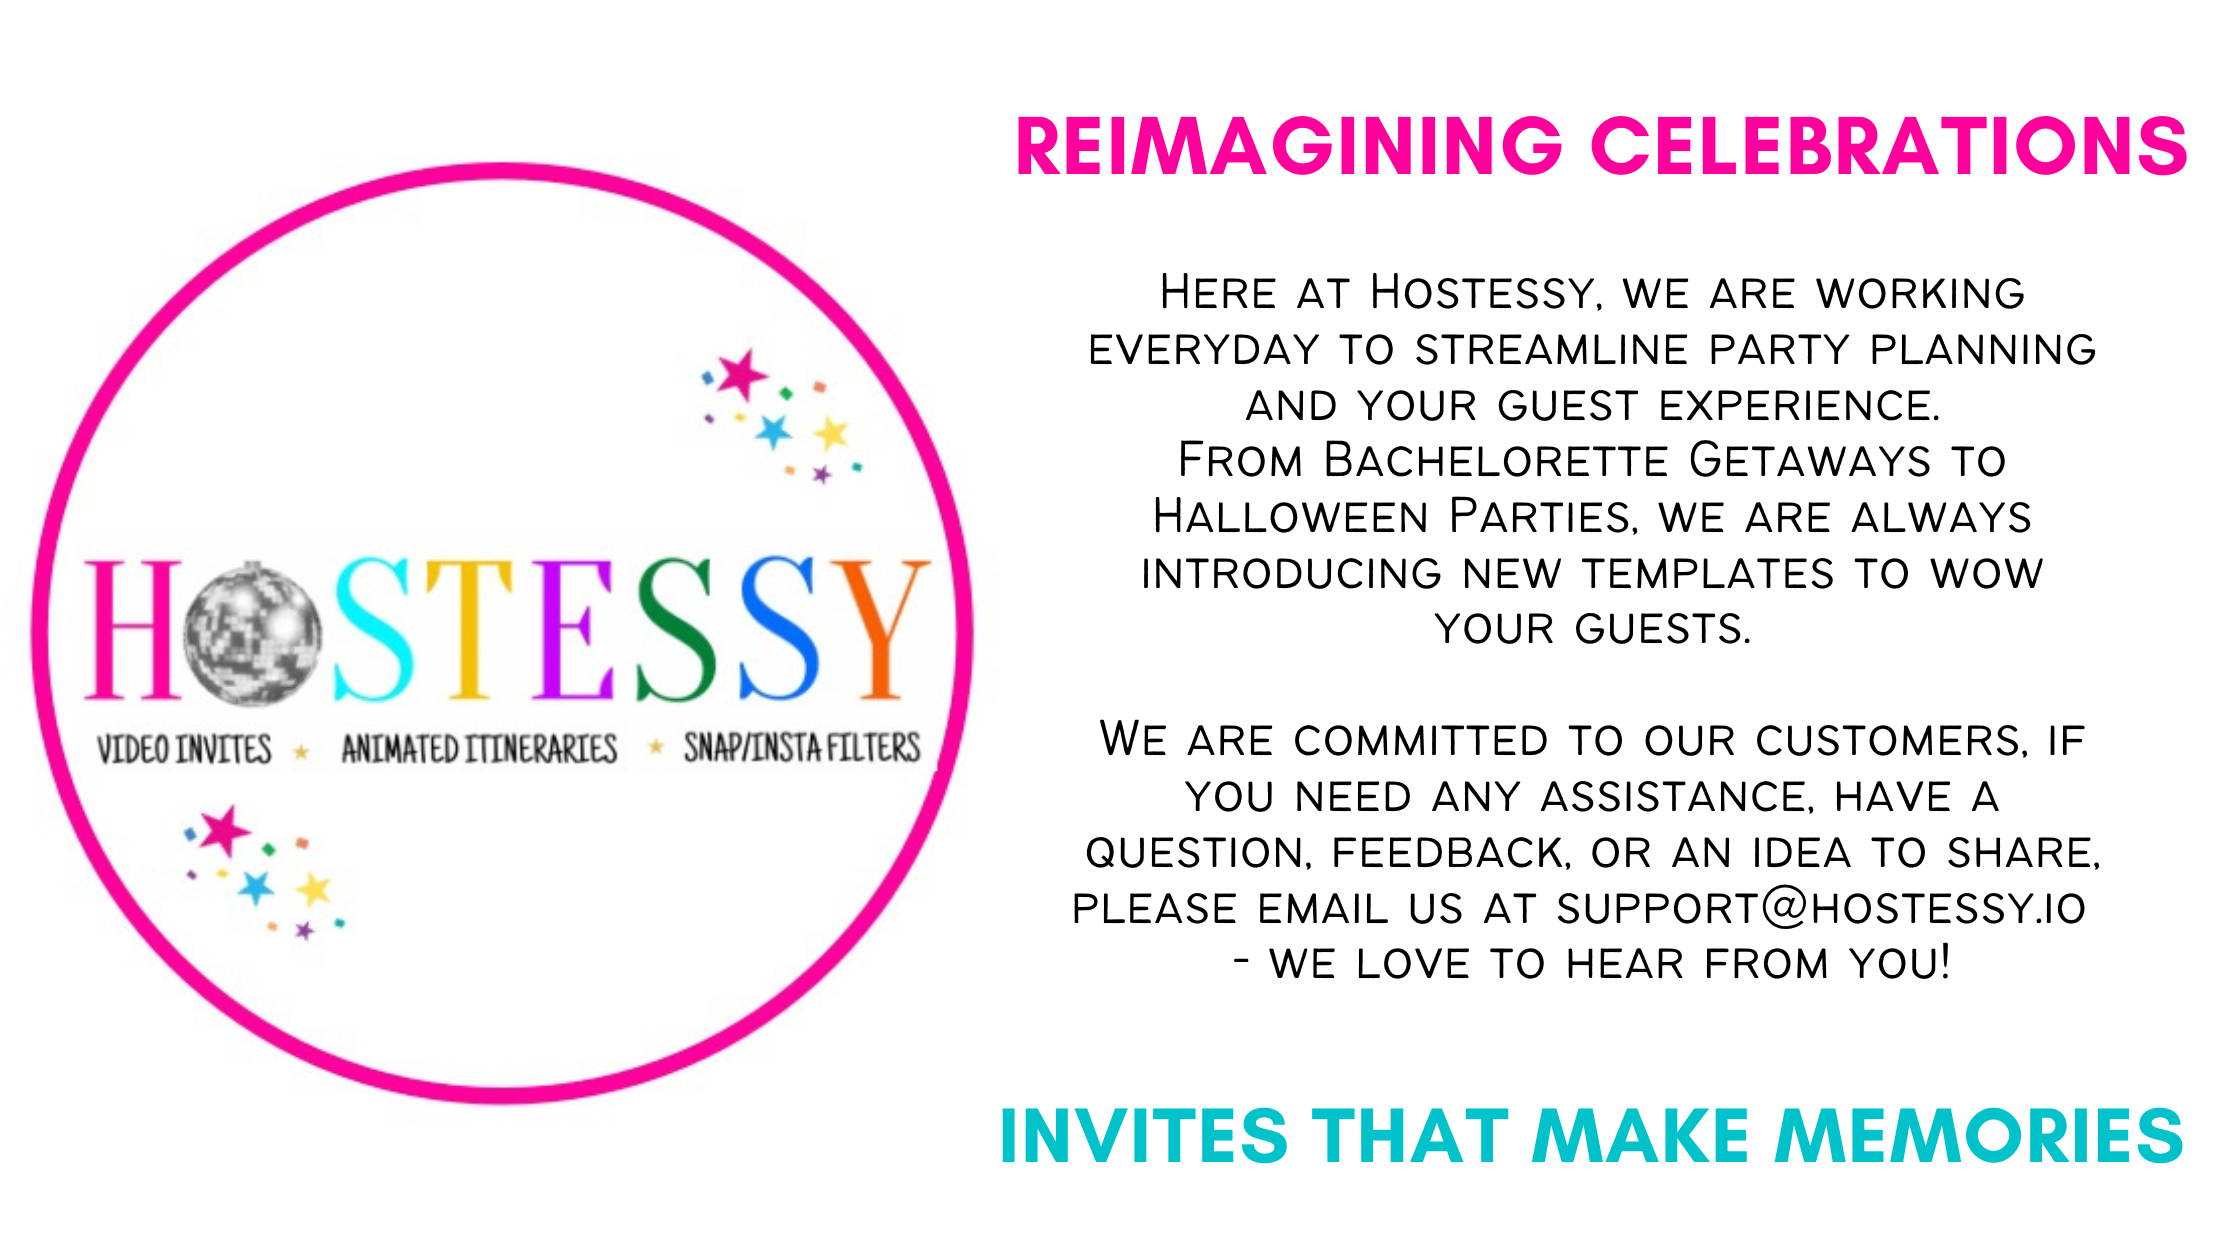 Impress your party guests with this Video Invitation for your next party from Hostessy. Shop the largest selection of editable video invitation templates and trip itinerary template! Edit your video invitation template in seconds with an easy invitation maker and share with your party guests. We have animated video invitation for any occasion like a birthday video invitation or wedding video invitation. We show you how to make a video invitation for baby showers, bridal showers, bachelorette parties, trip itineraries, weddings, holidays, birthdays, graduations, or any occasion! 